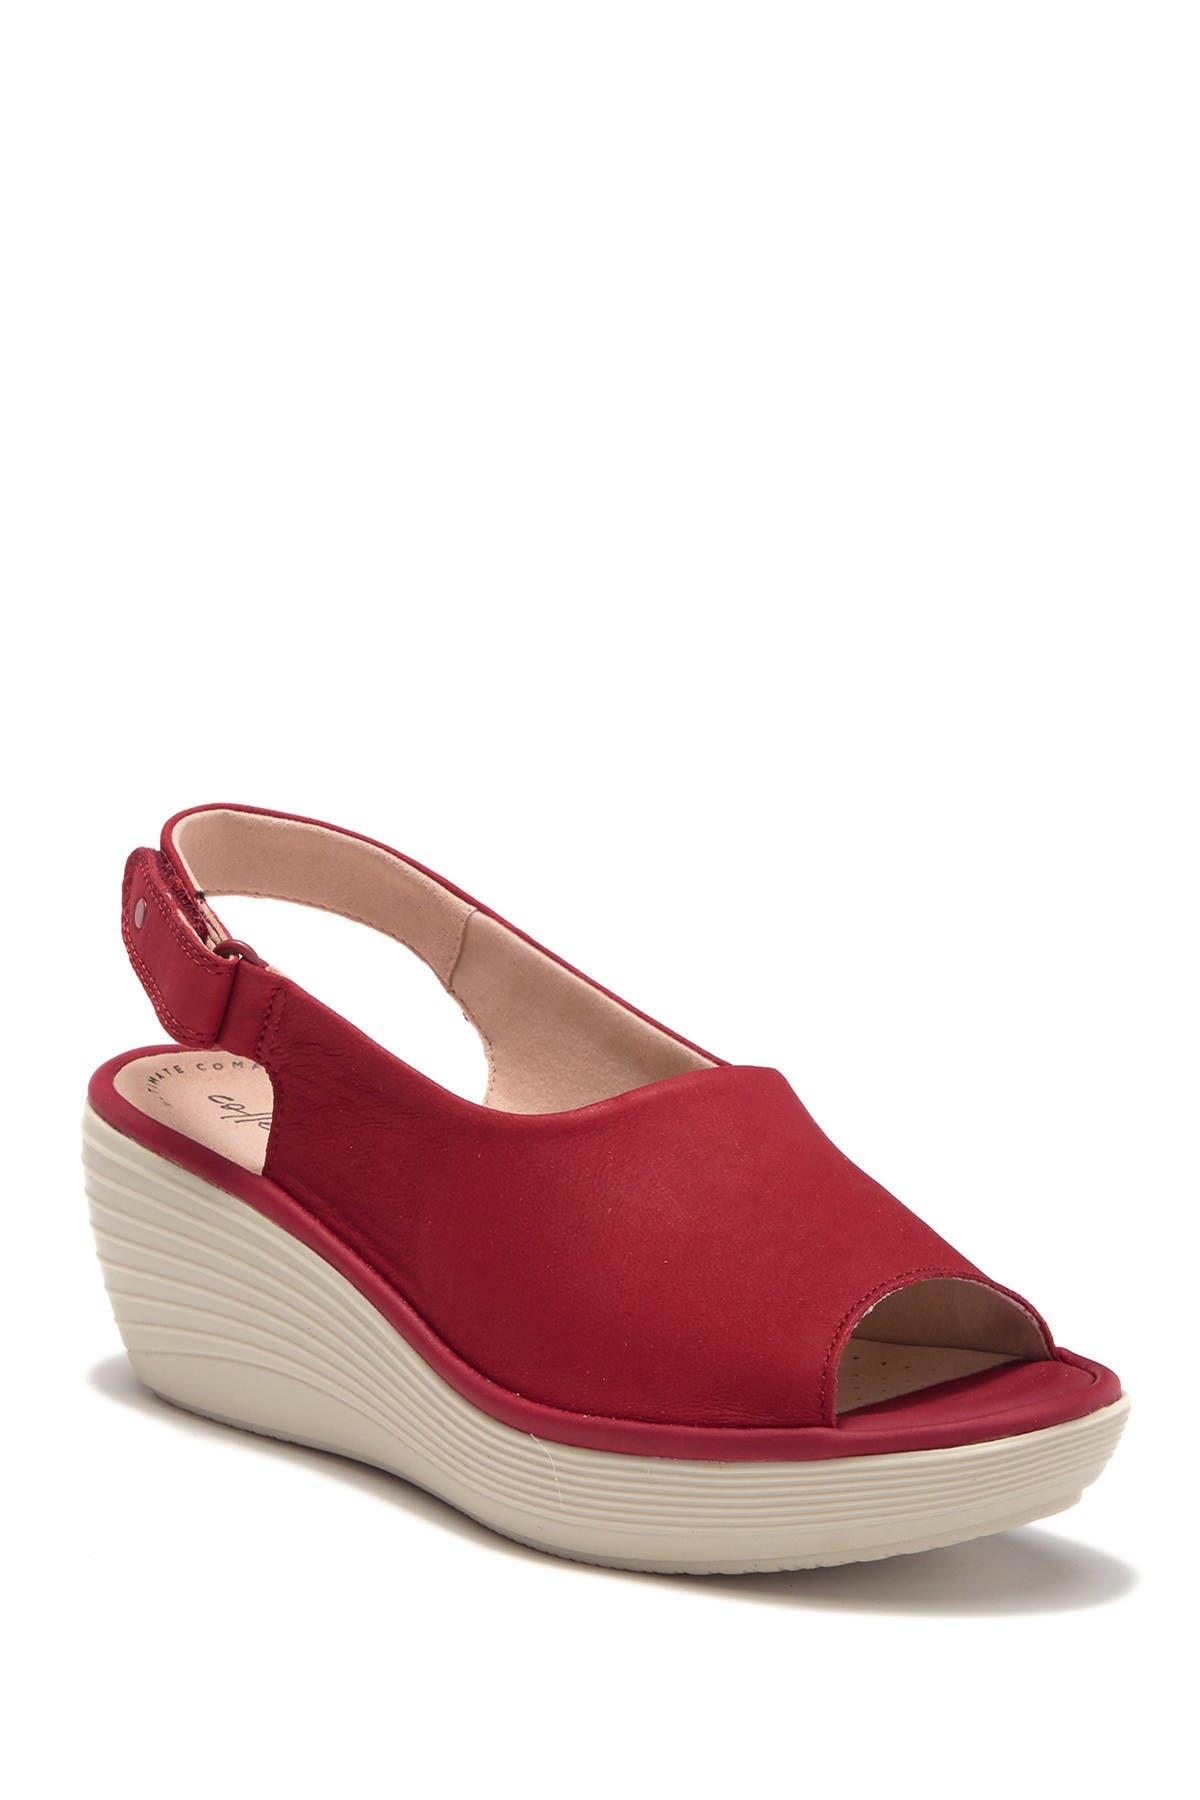 reedly shaina wedge sandals